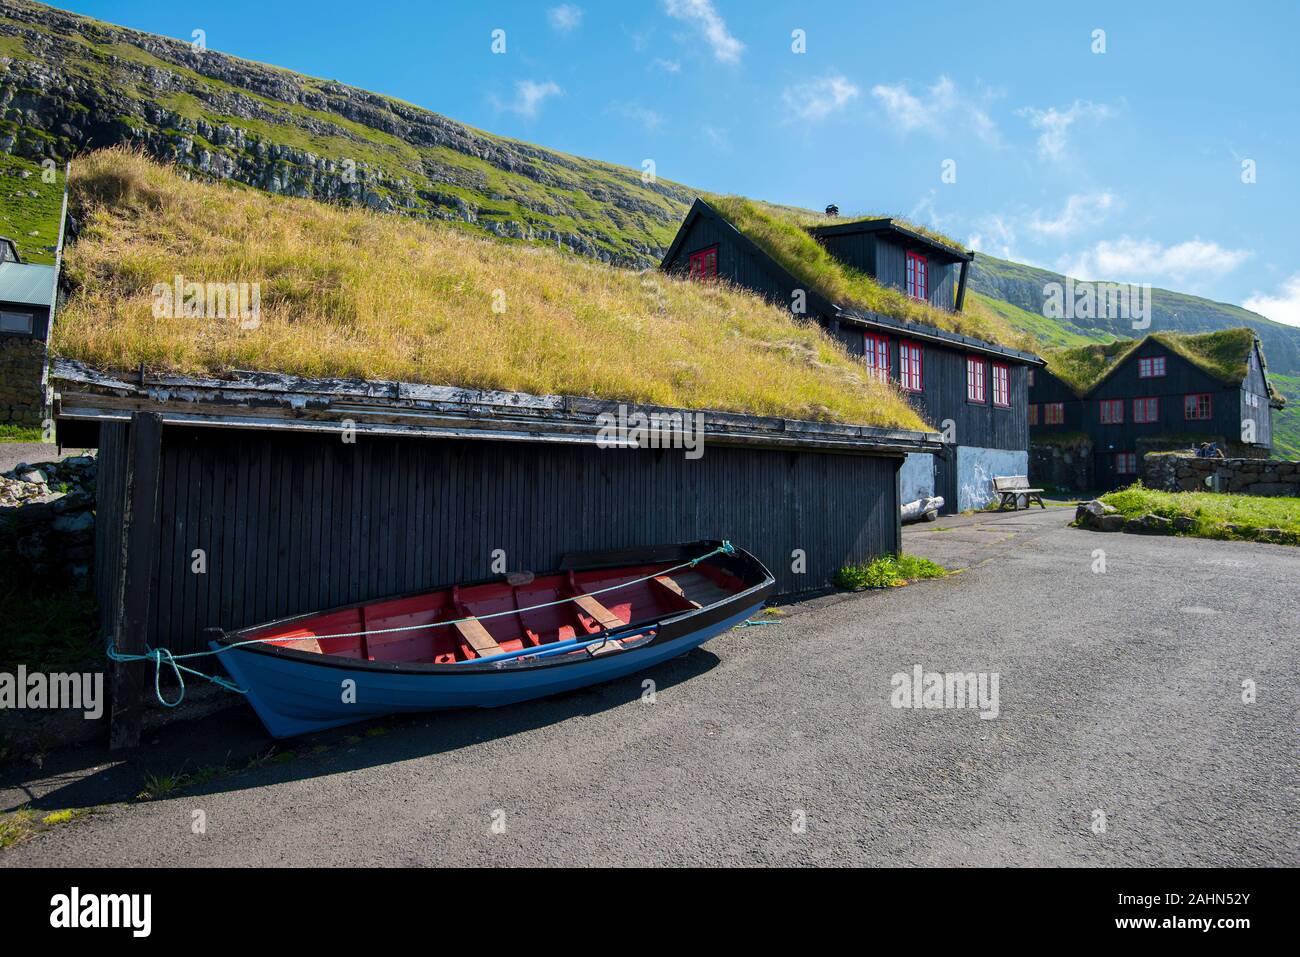 Streat view of the old part of Kirkjubour Village, Faroese island of Streymoy Stock Photo